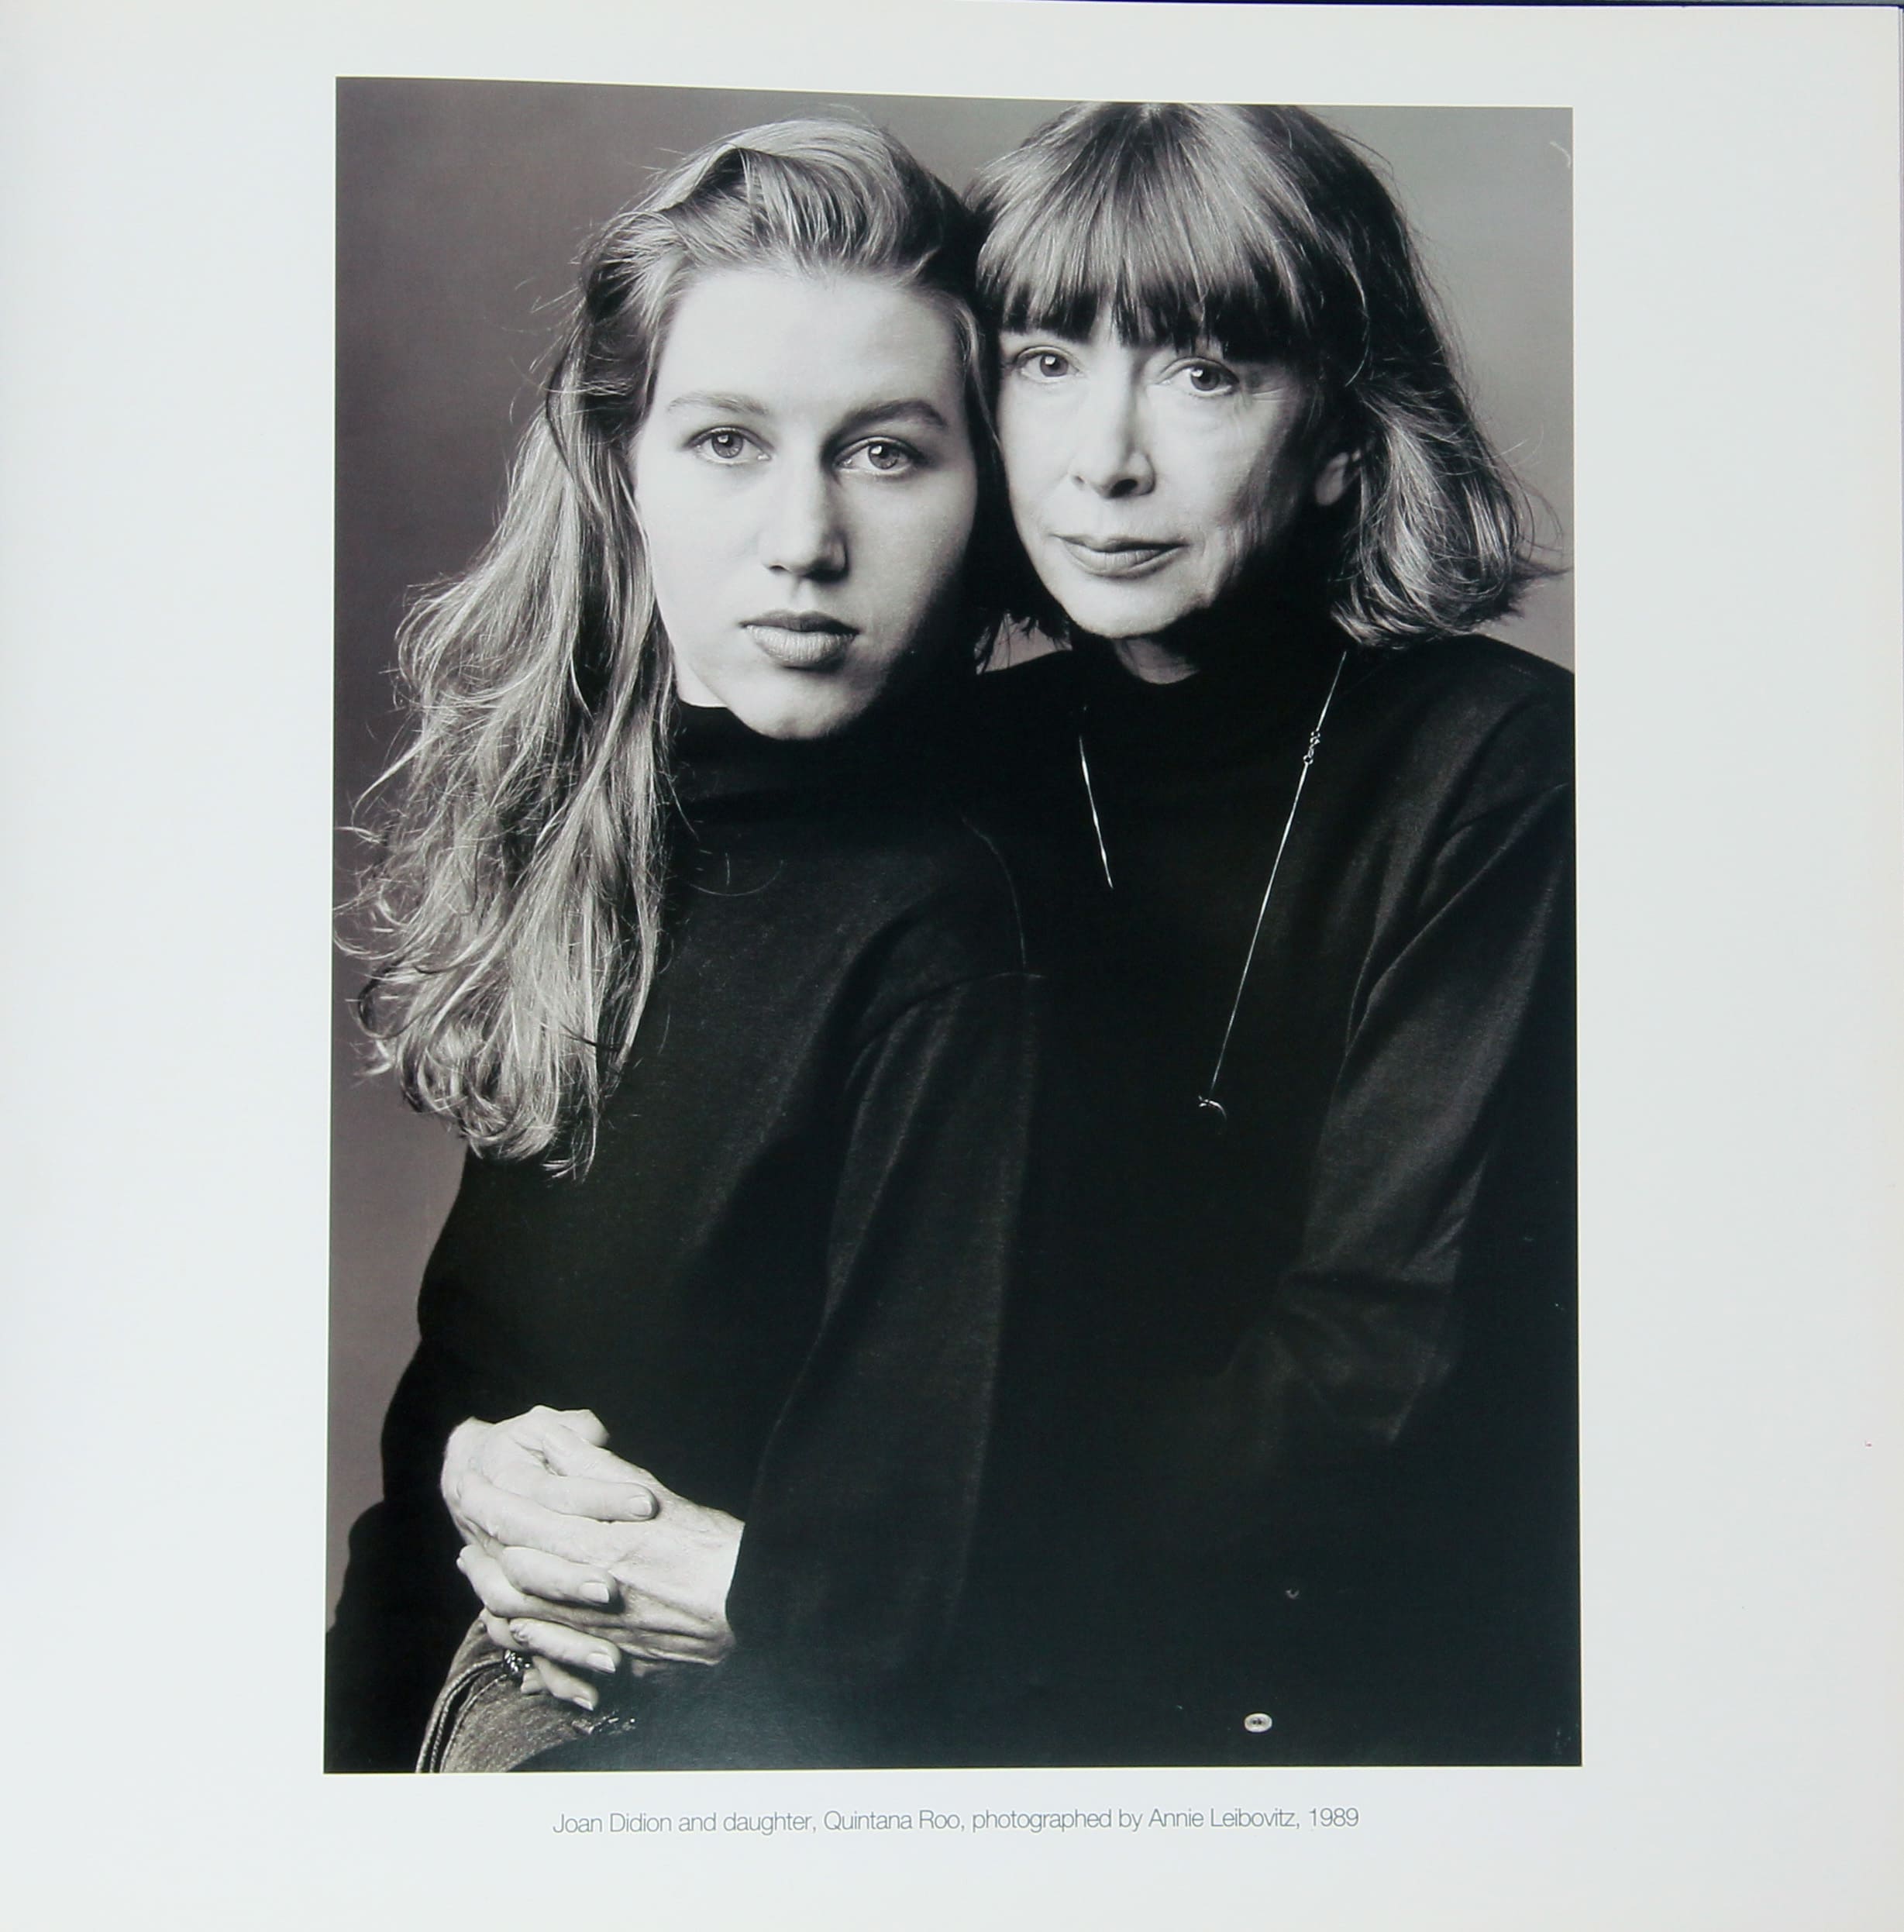 Individuals, Portraits from the Gap Collection, Signed by Kim Basinger